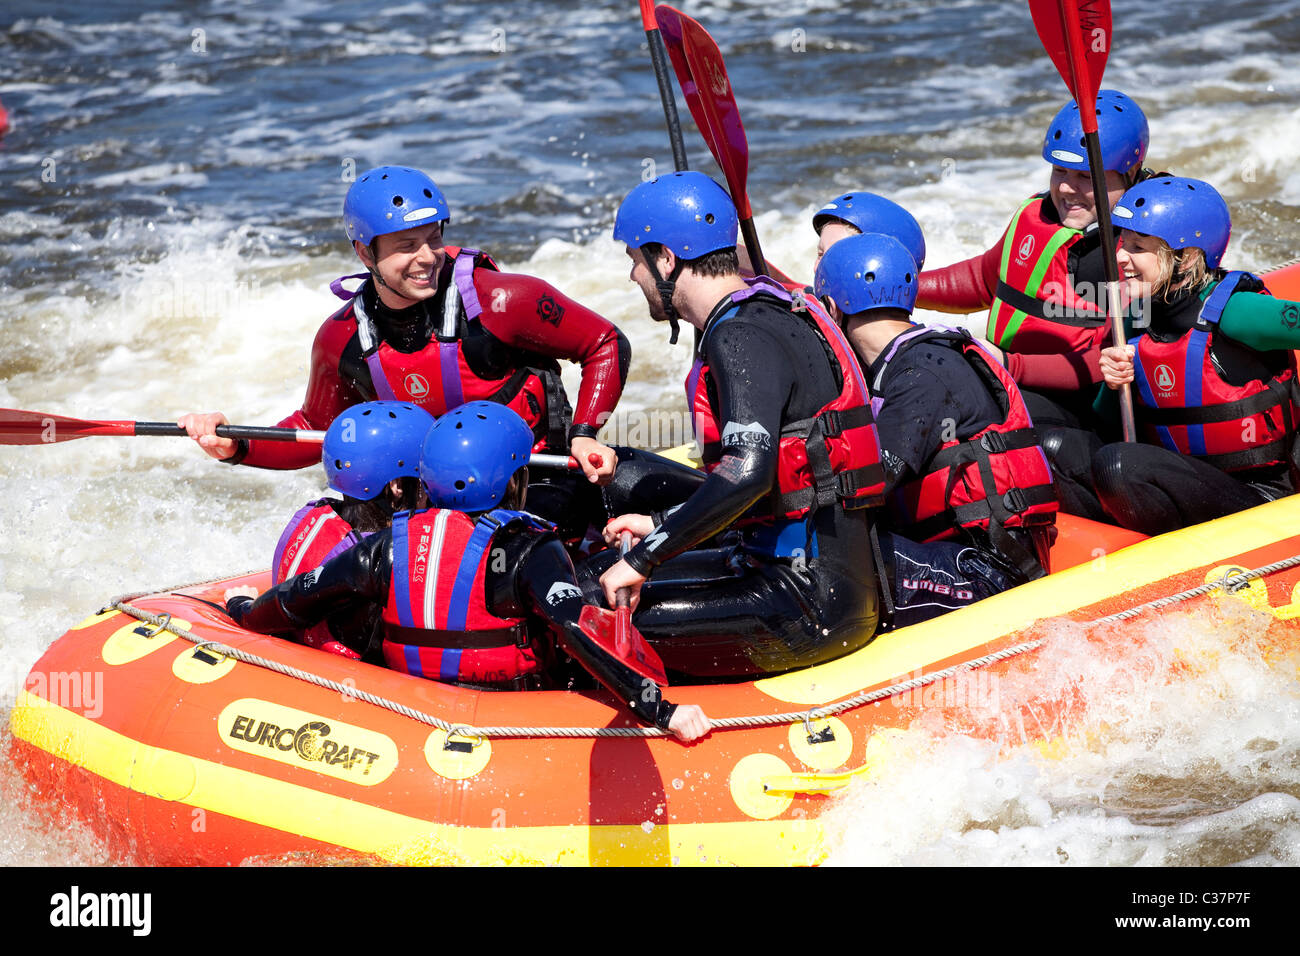 White water rafting at National Water Sports Centre, Holme Pierrepoint, Nottingham England UK Stock Photo